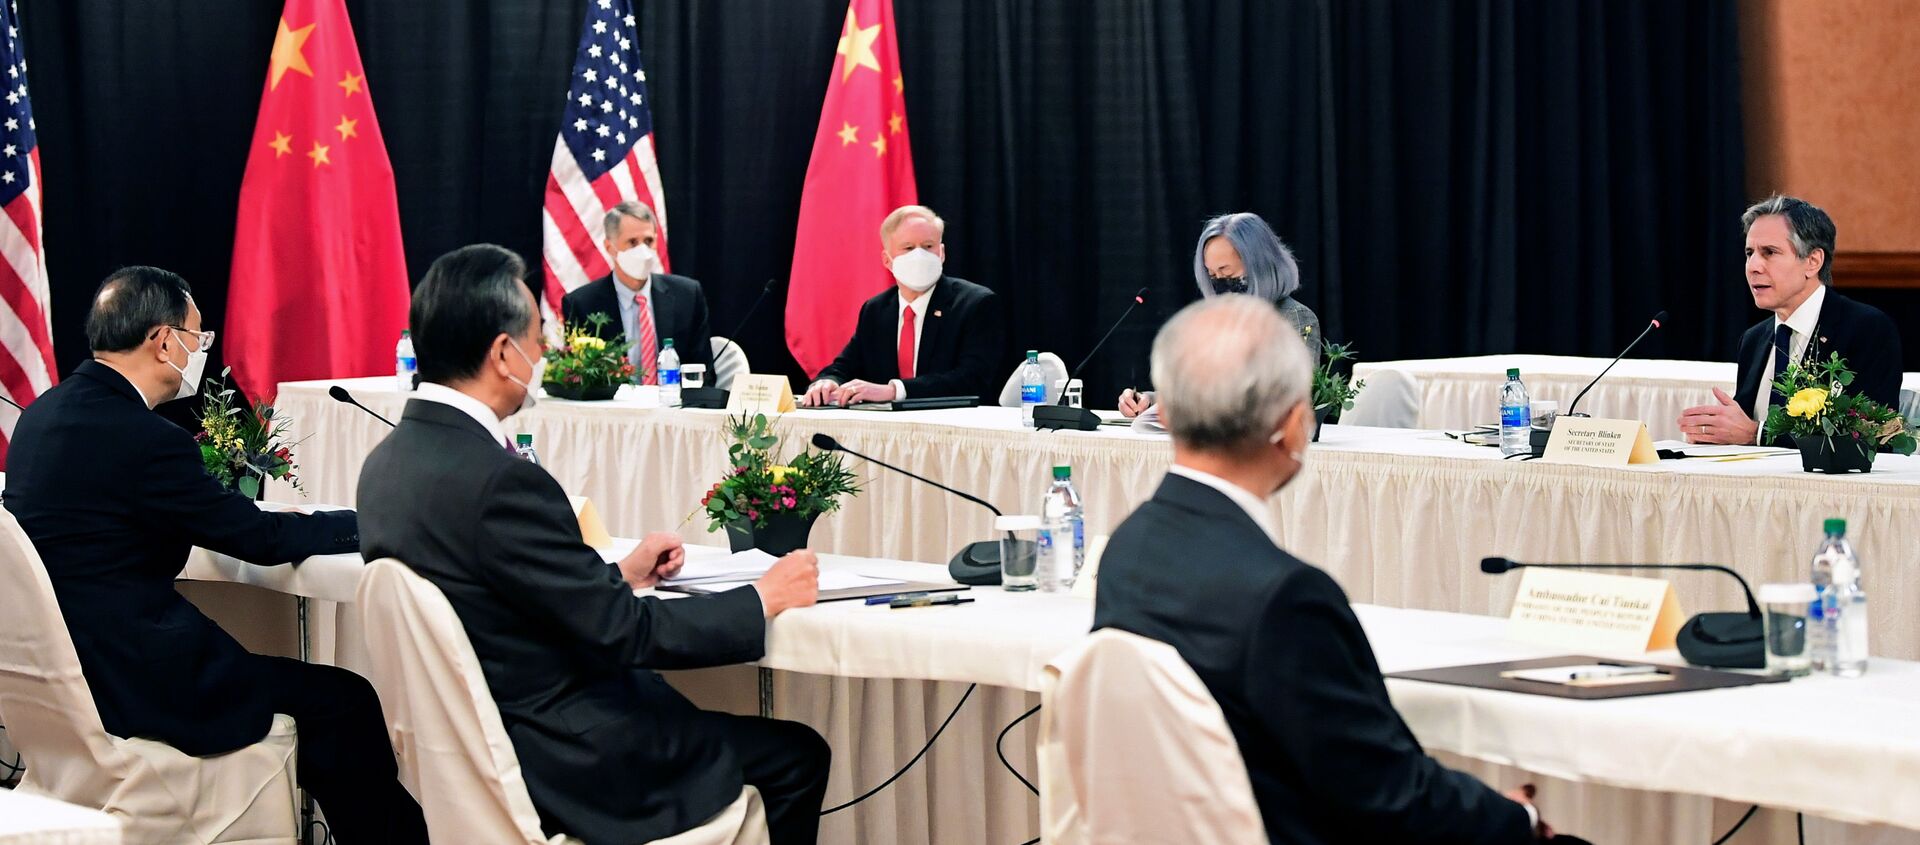 U.S. Secretary of State Antony Blinken (R) speaks while facing Yang Jiechi (L), director of the Central Foreign Affairs Commission Office, and Wang Yi (2nd L), China's State Councilor Wang and Foreign Minister, at the opening session of US-China talks at the Captain Cook Hotel in Anchorage, Alaska on March 18, 2021. - Sputnik International, 1920, 20.03.2021